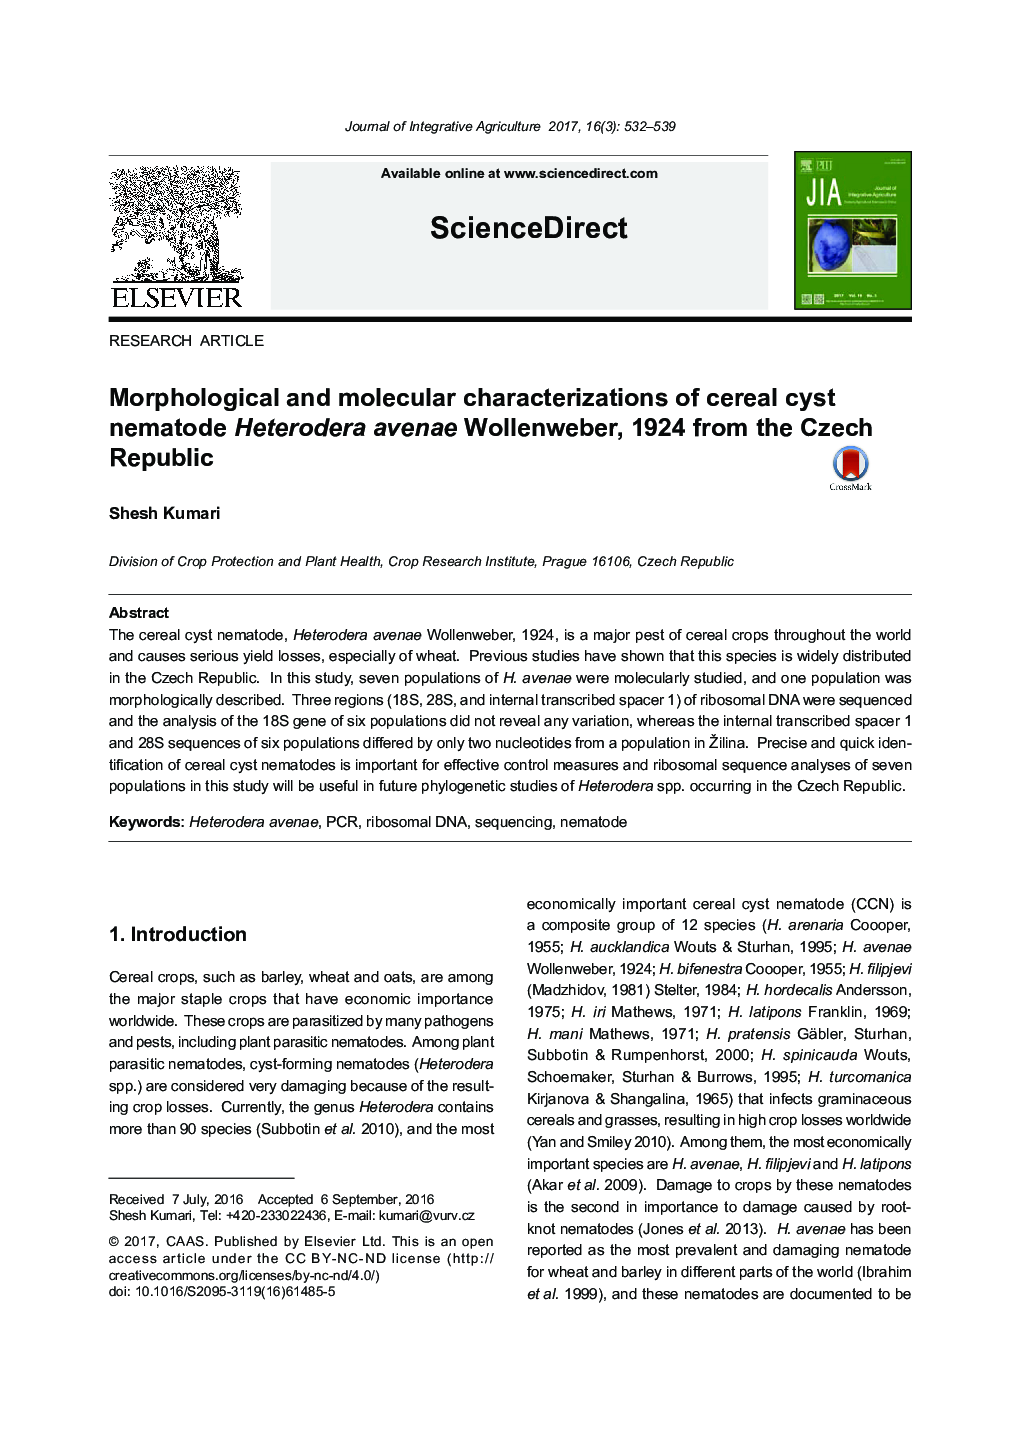 Morphological and molecular characterizations of cereal cyst nematode Heterodera avenae Wollenweber, 1924 from the Czech Republic